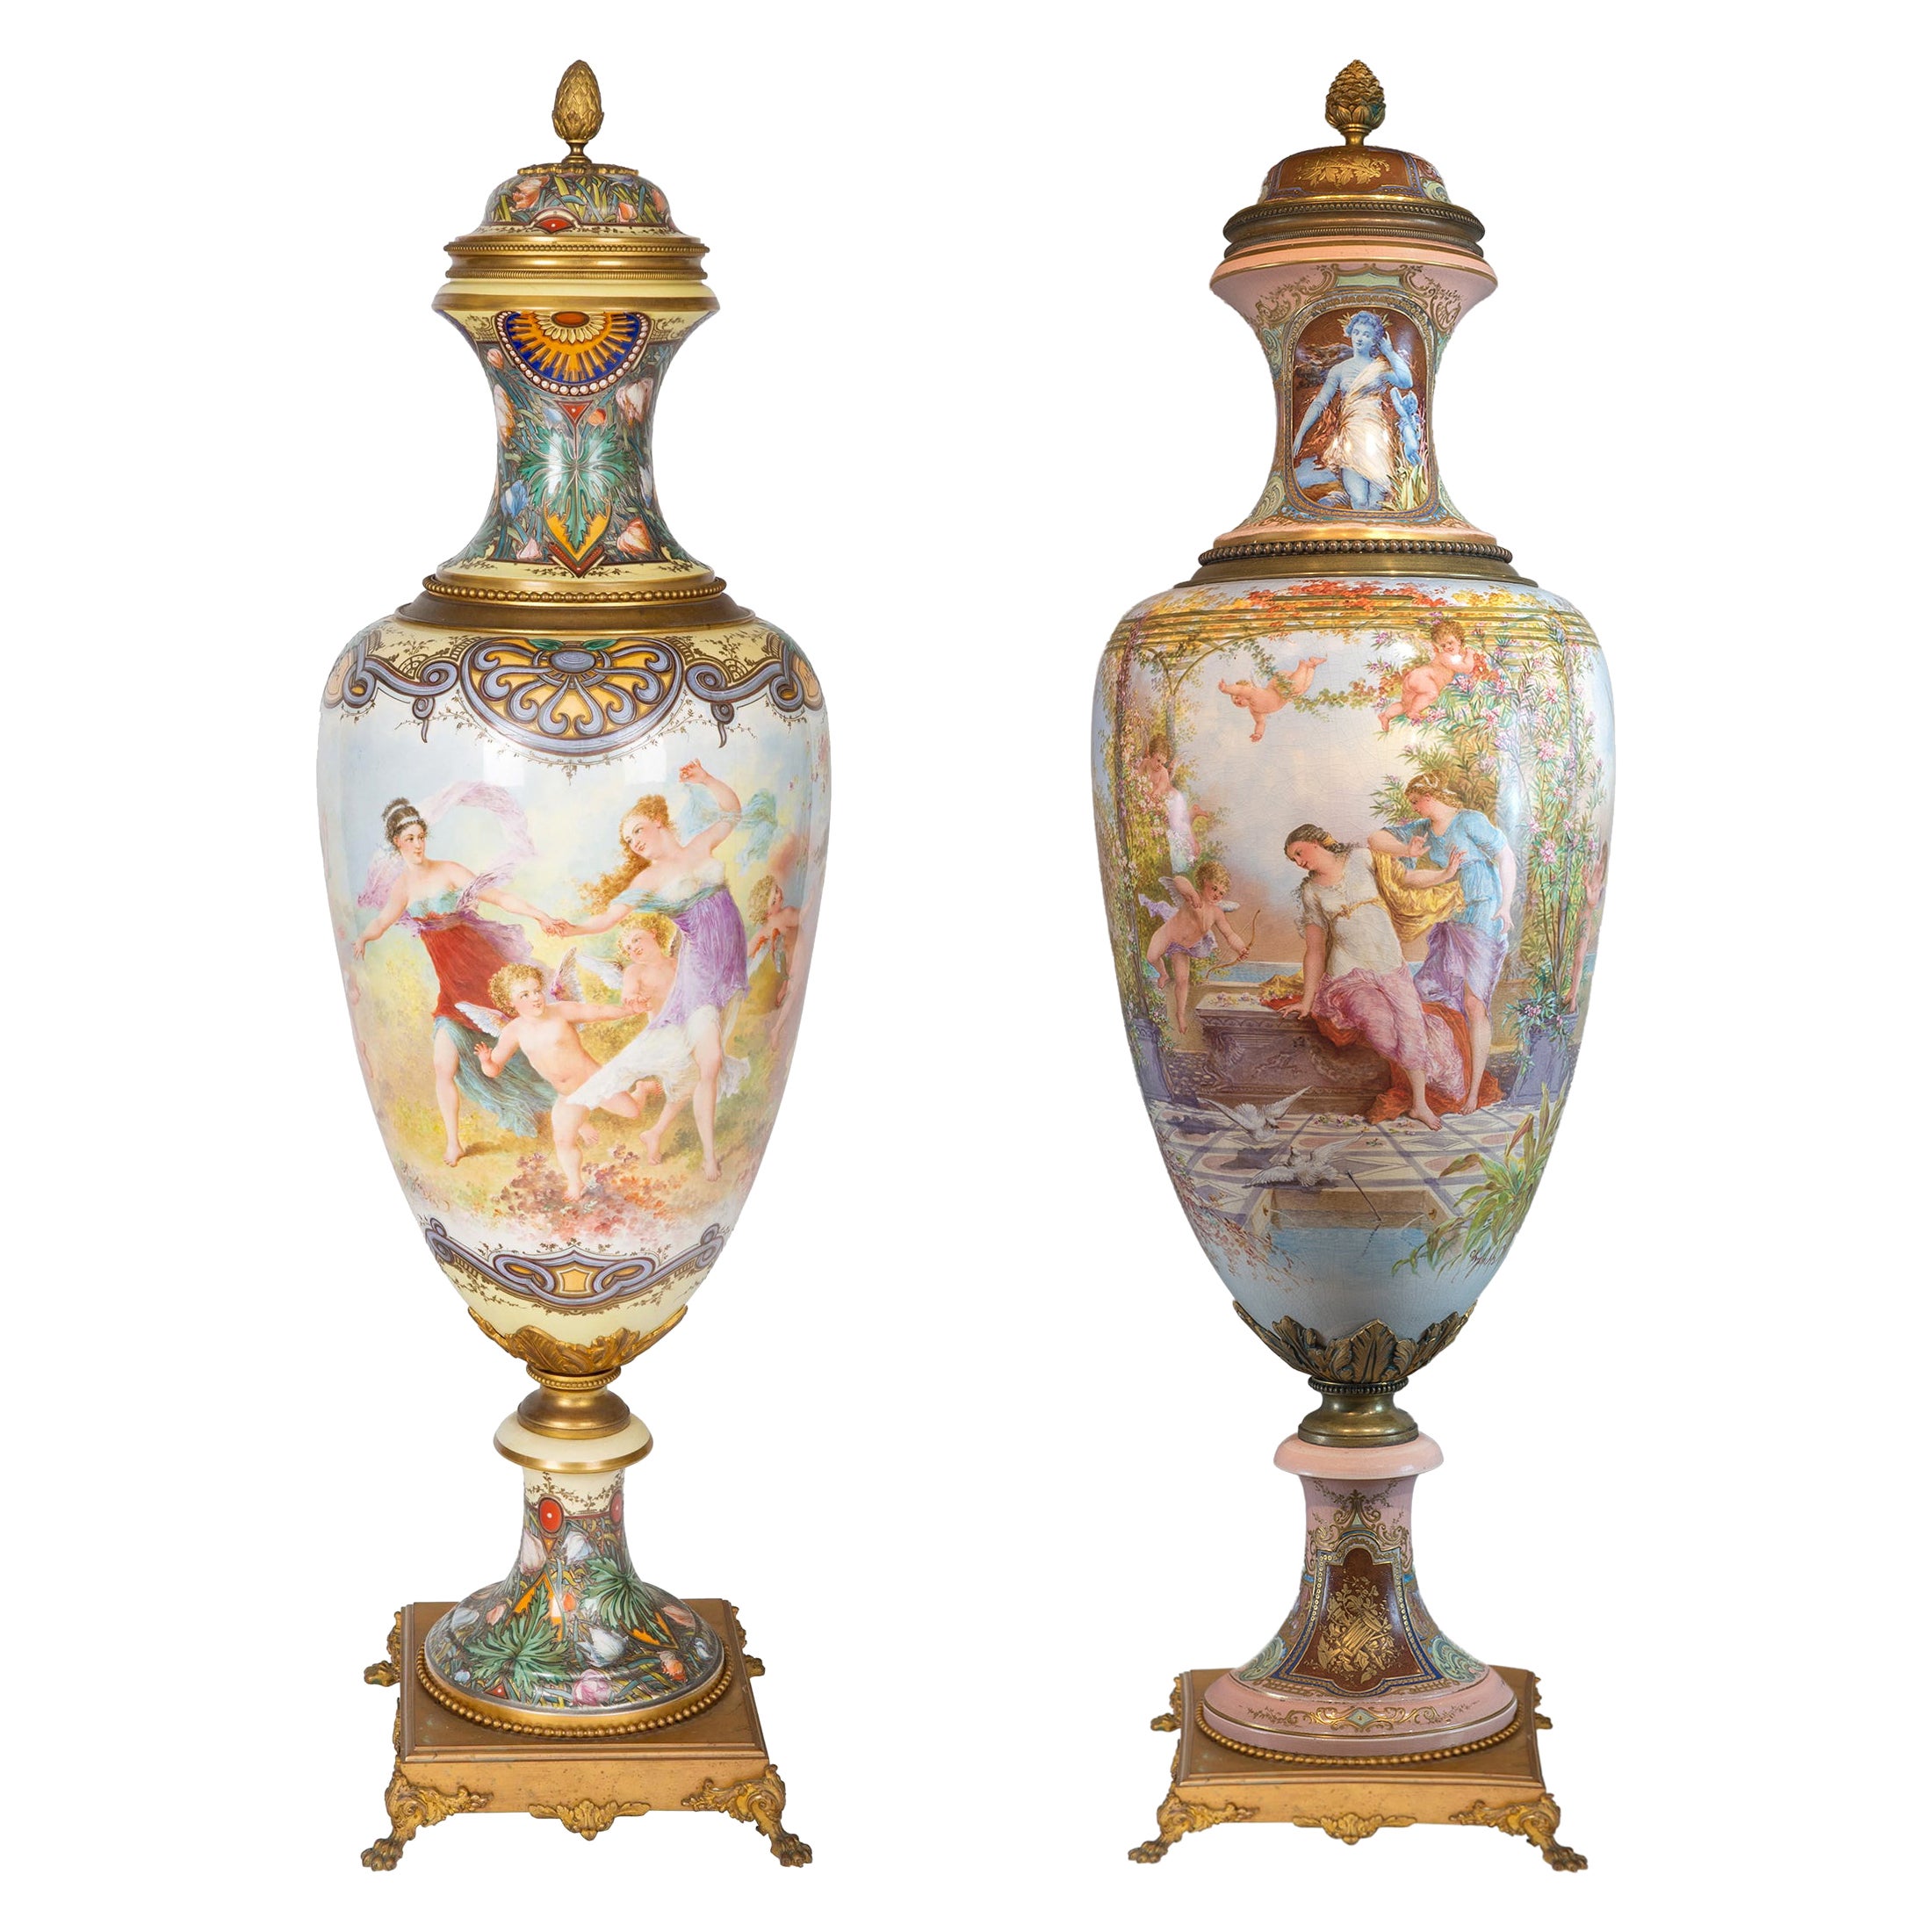  Pair of Monumental Sèvres and Gilt Bronze-Mounted Vase by Fuchs